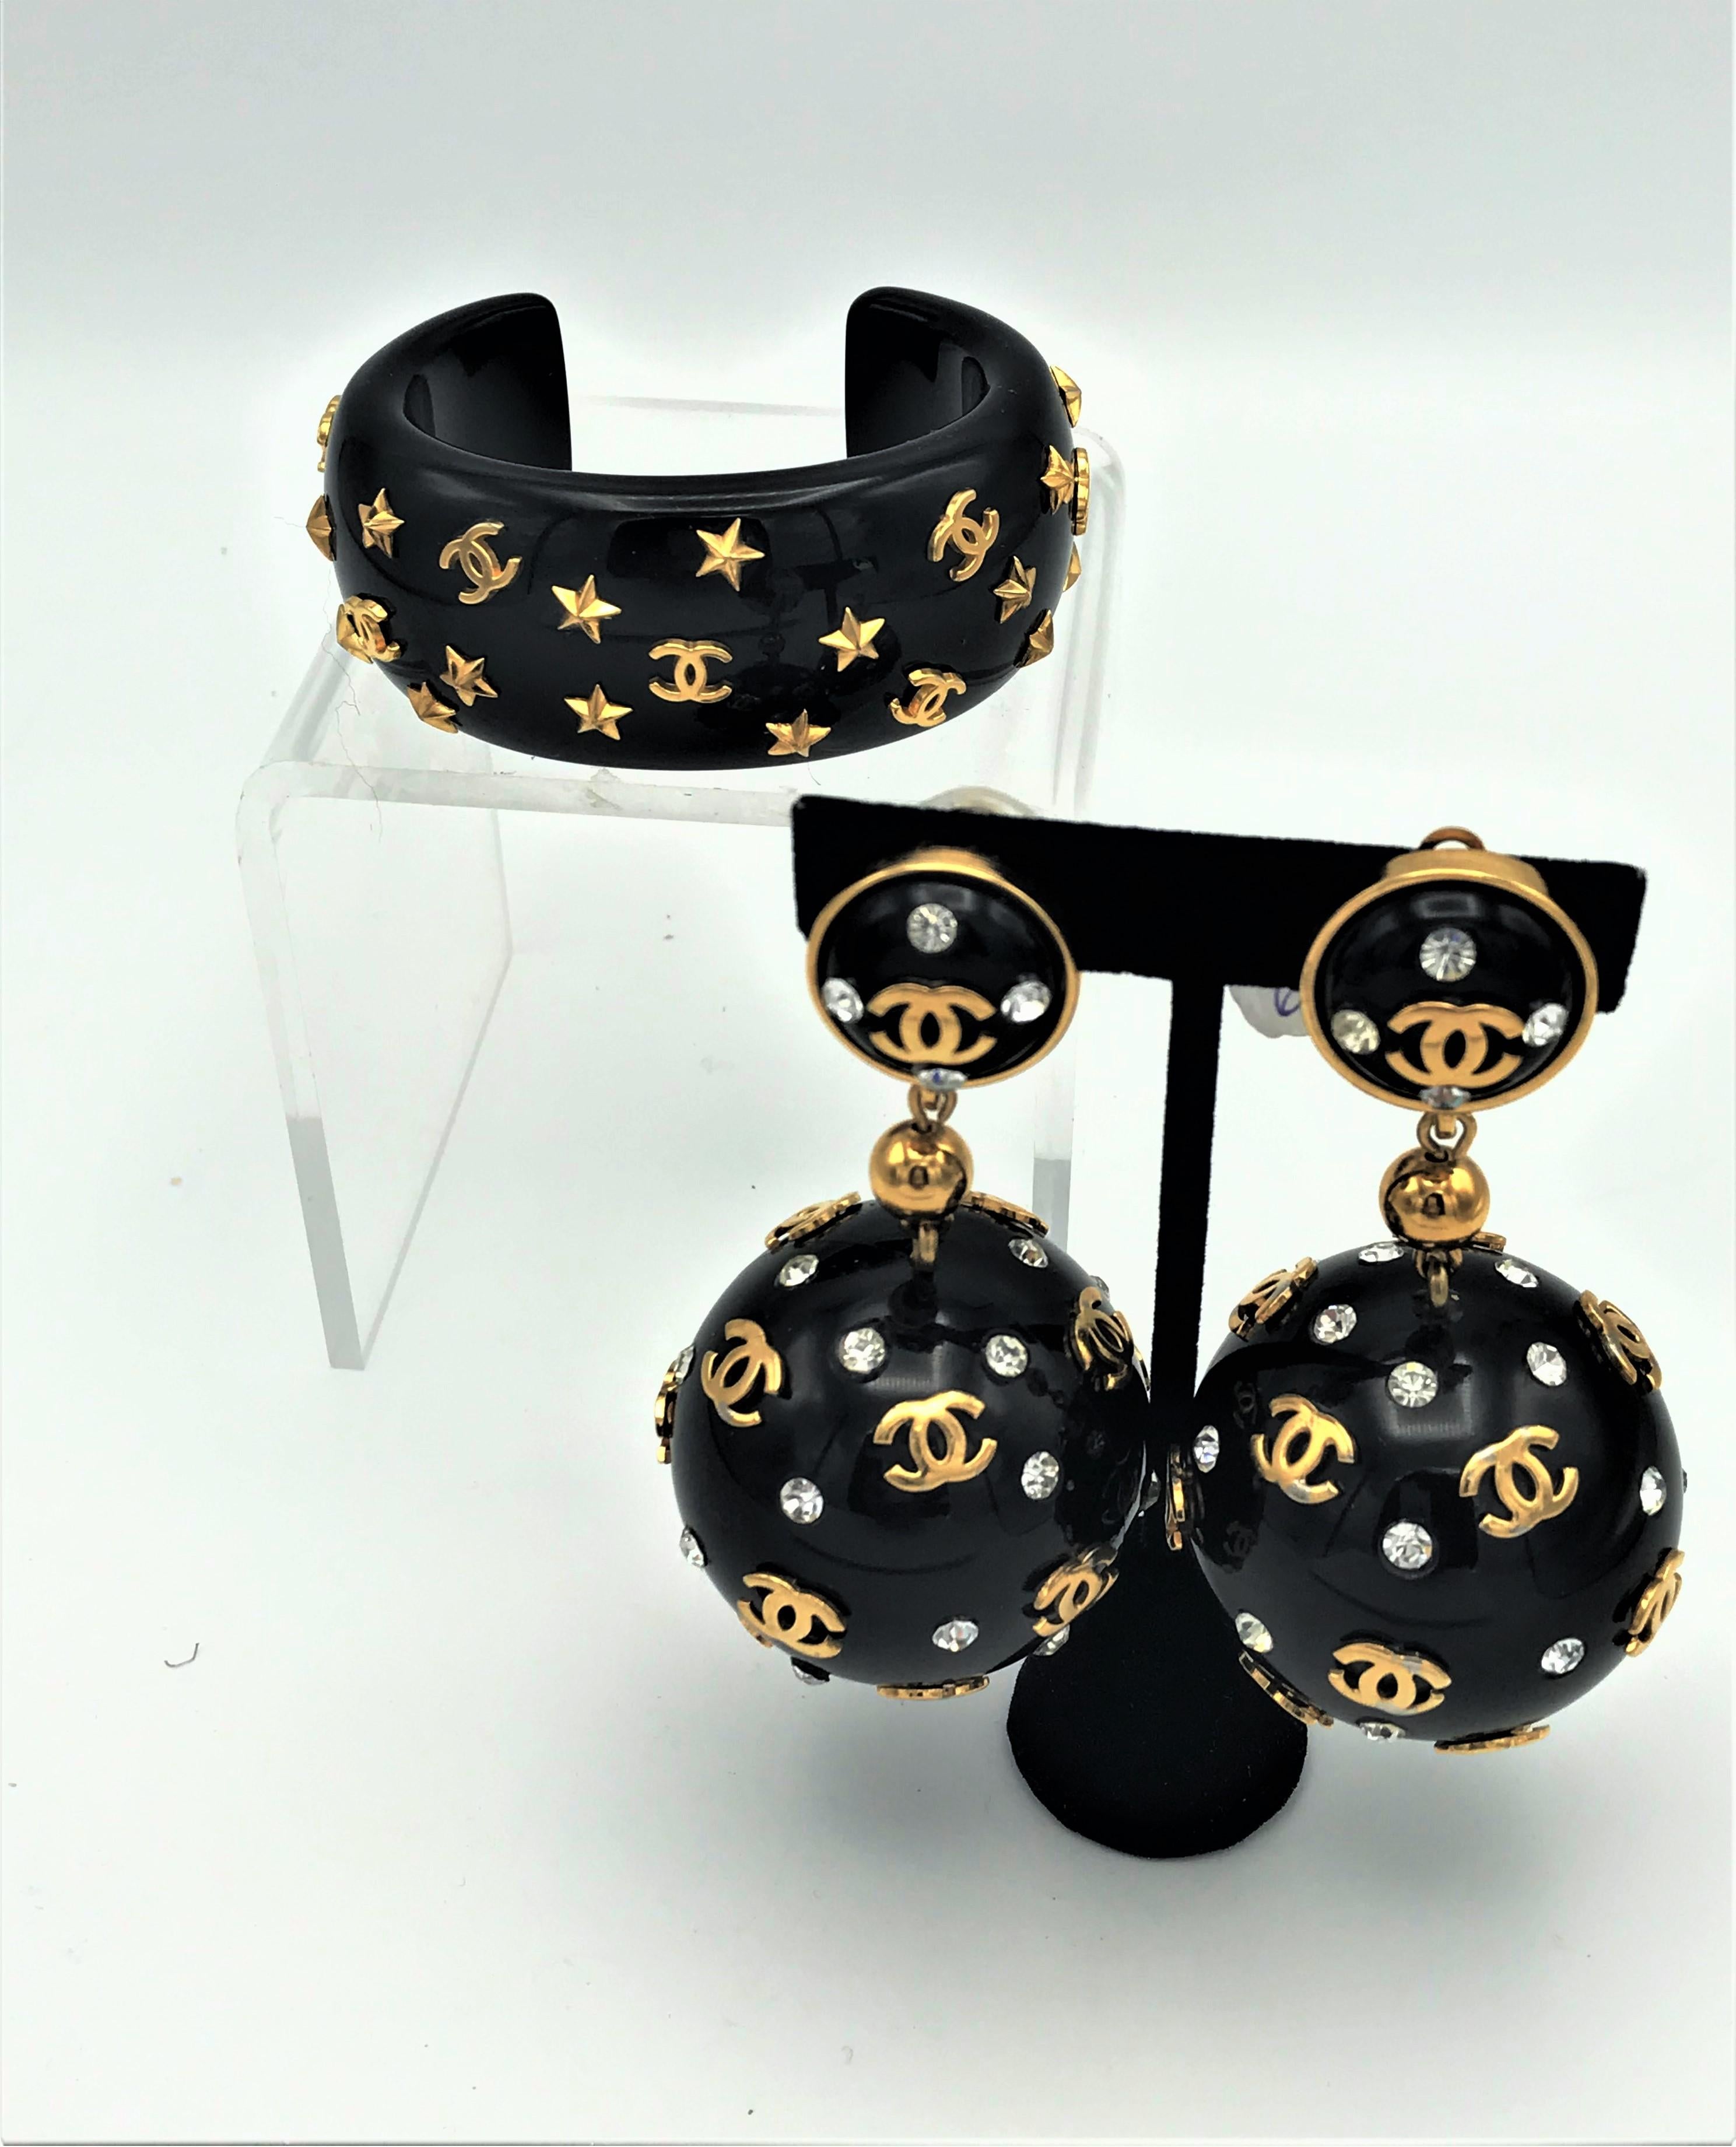 Women's Chanel open bracelet, molded black acrylic signed 95 CC P with gold stars and CC